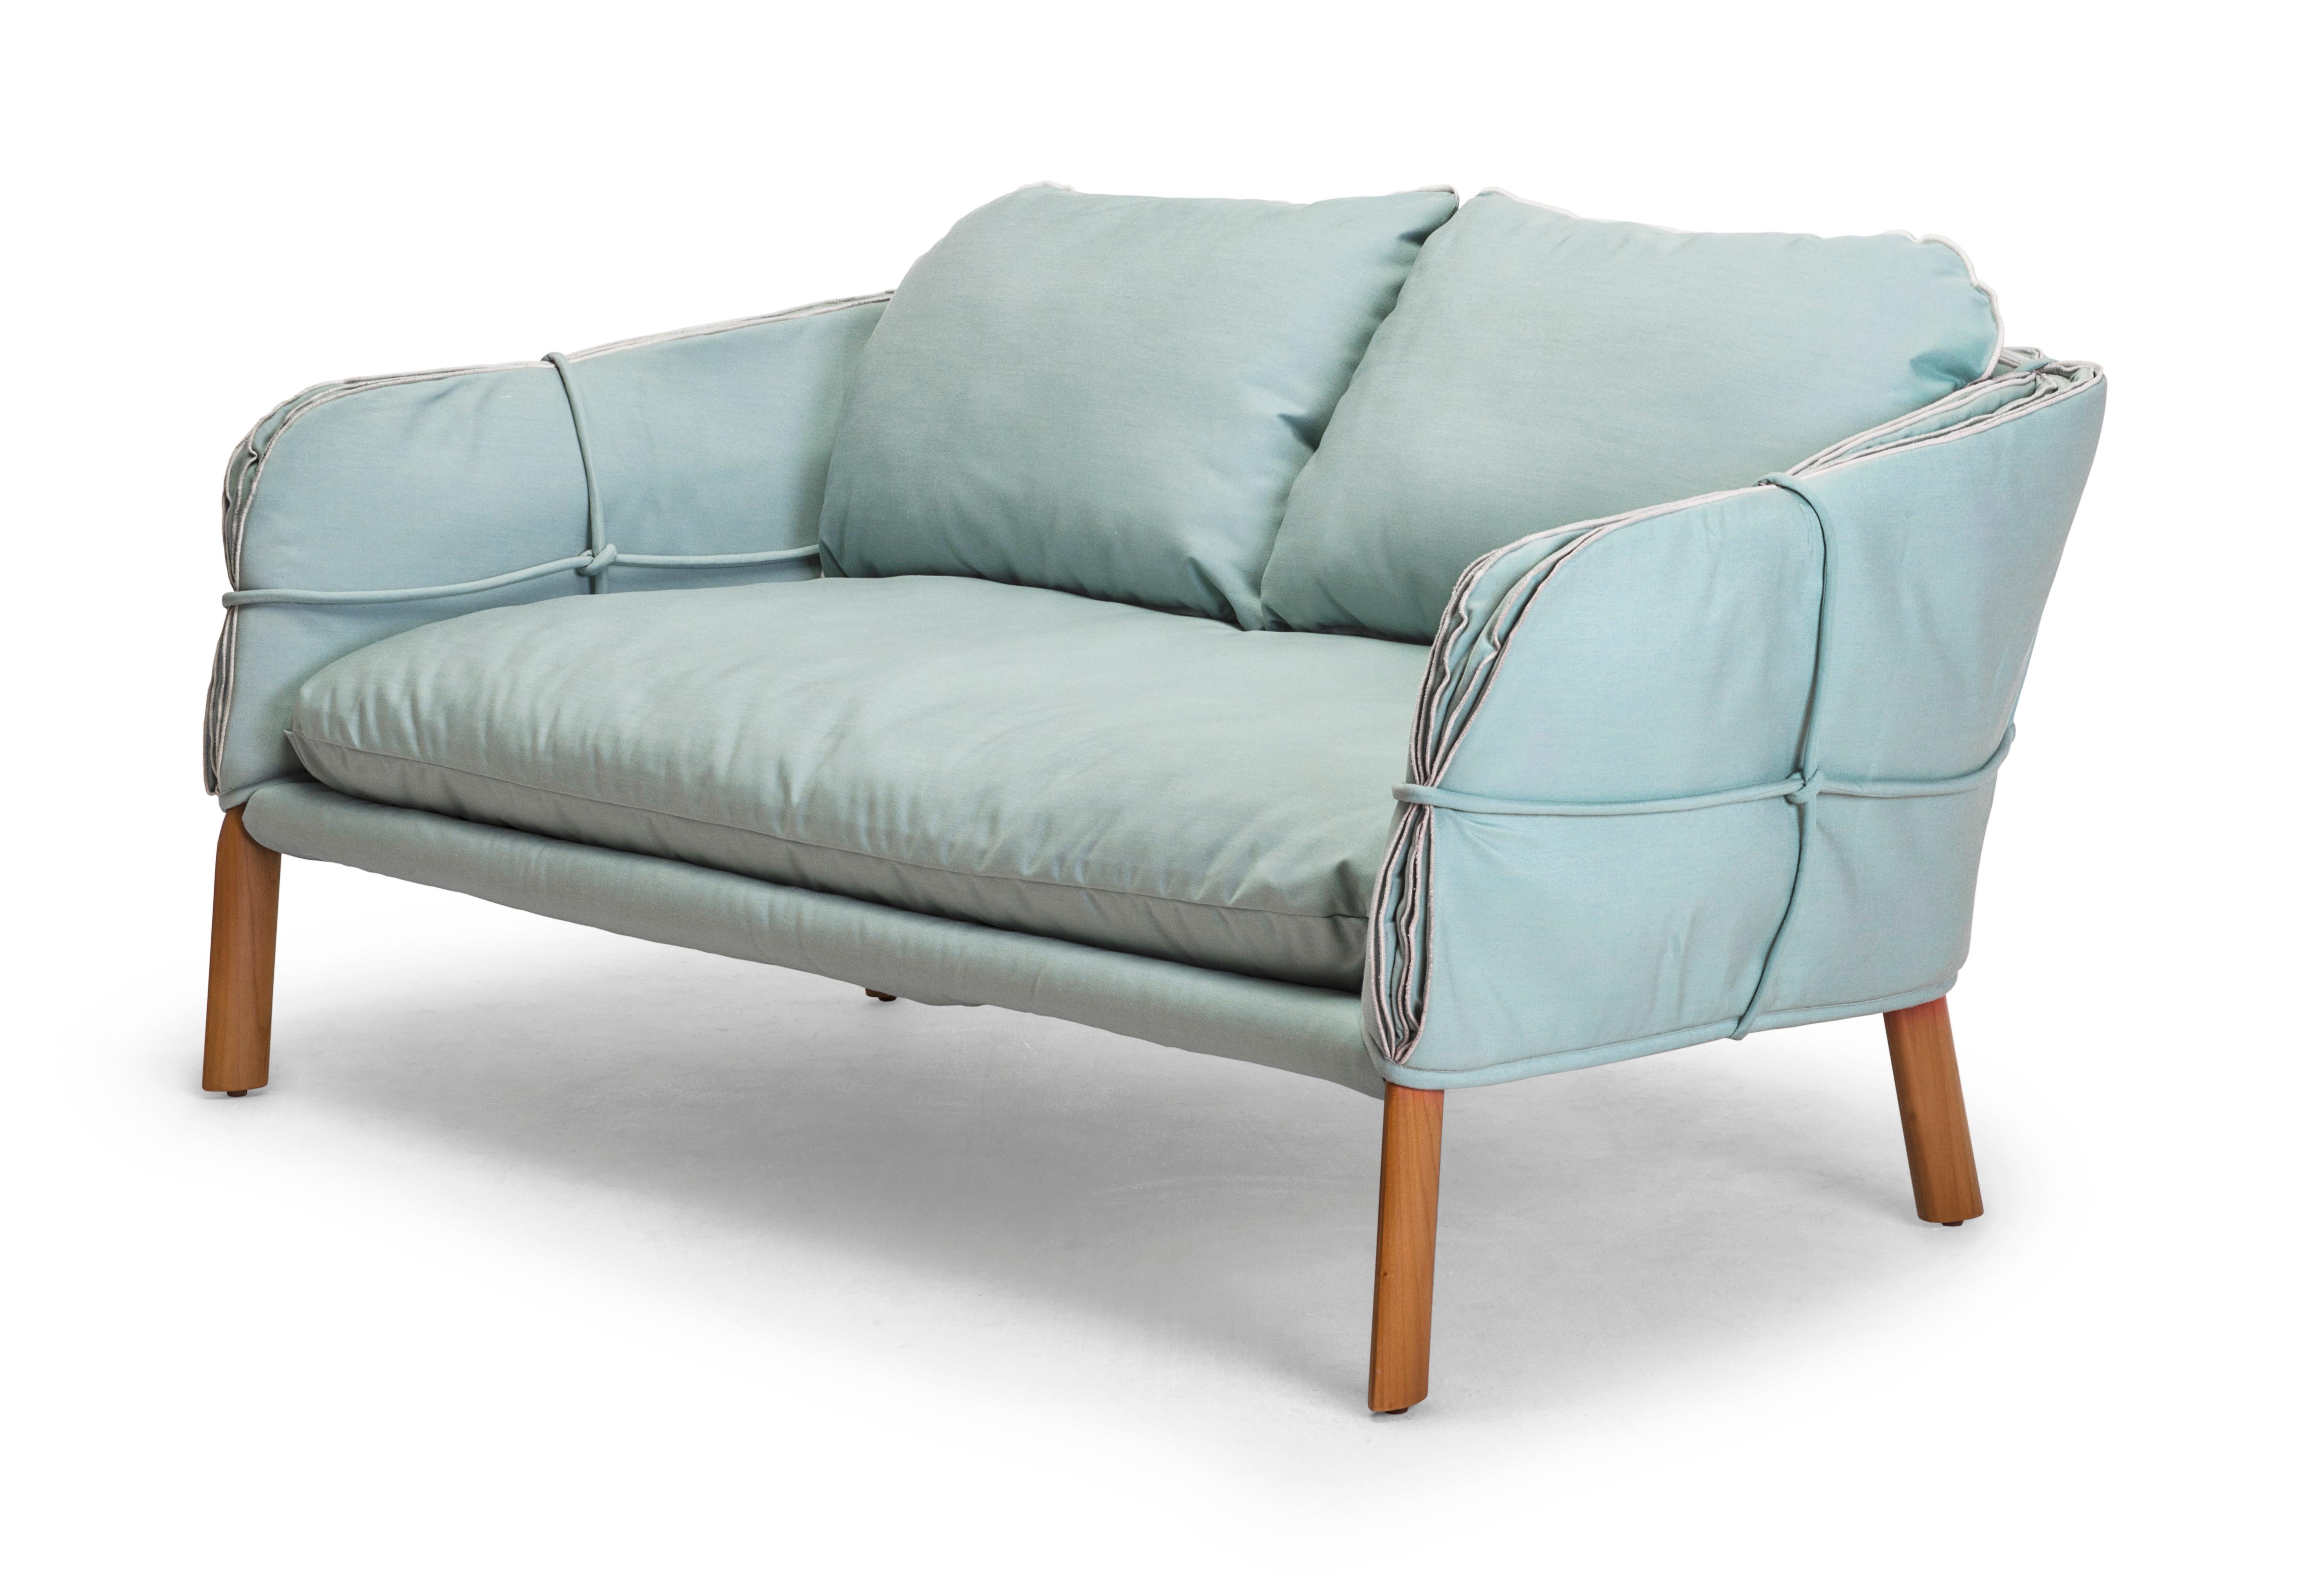 Parchment loveseat by Kenneth Cobonpue.
Materials: Maple, steel.
Also available in other colors.
Dimensions: 89 cm x 155.5 cm x H 78.5cm 

Inspired by bound manuscripts, the edges and surfaces of the Parchment collection imitate the natural